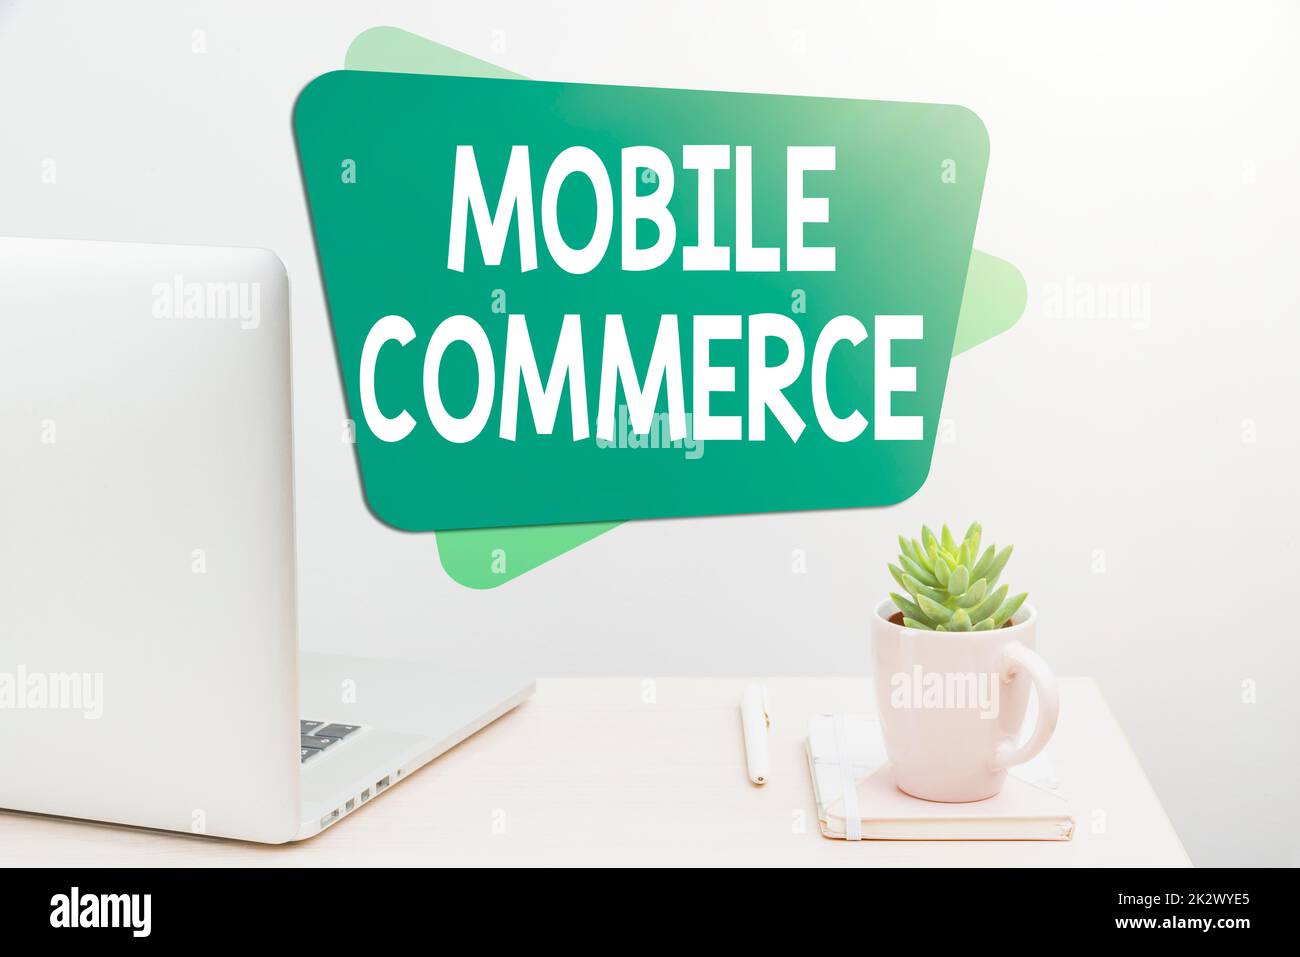 Writing displaying text Mobile Commerce. Word Written on Using mobile phone to conduct commercial transactions online Tidy Workspace Setup, Writing Desk Tools Equipment, Smart Office Stock Photo